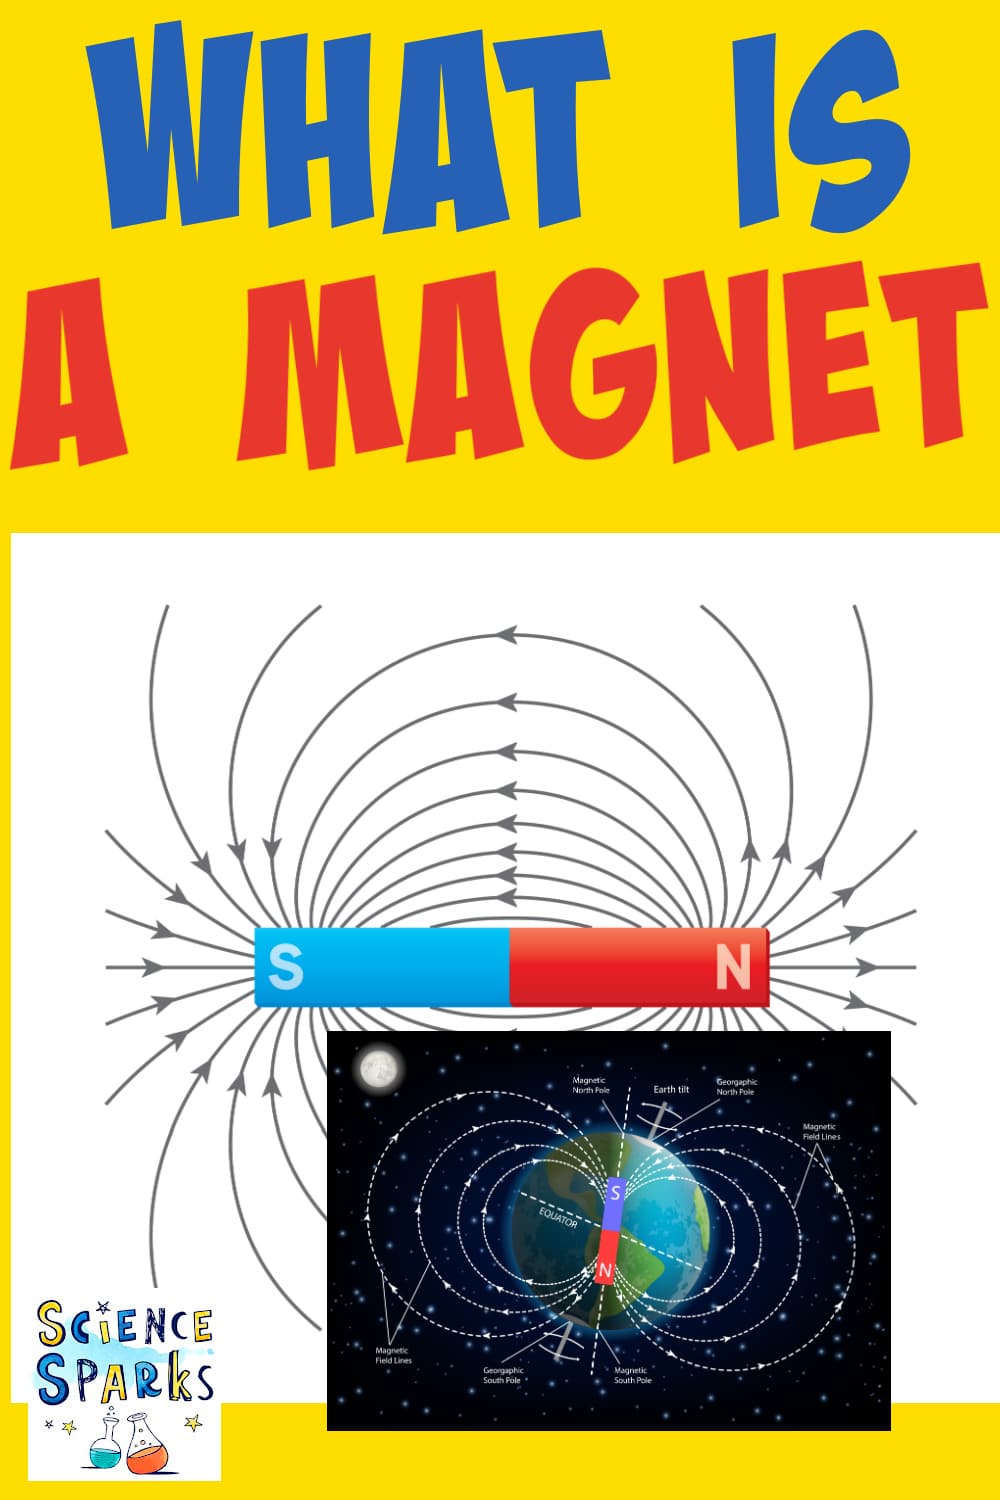 https://www.science-sparks.com/wp-content/uploads/2023/01/What-is-a-magnet.jpg